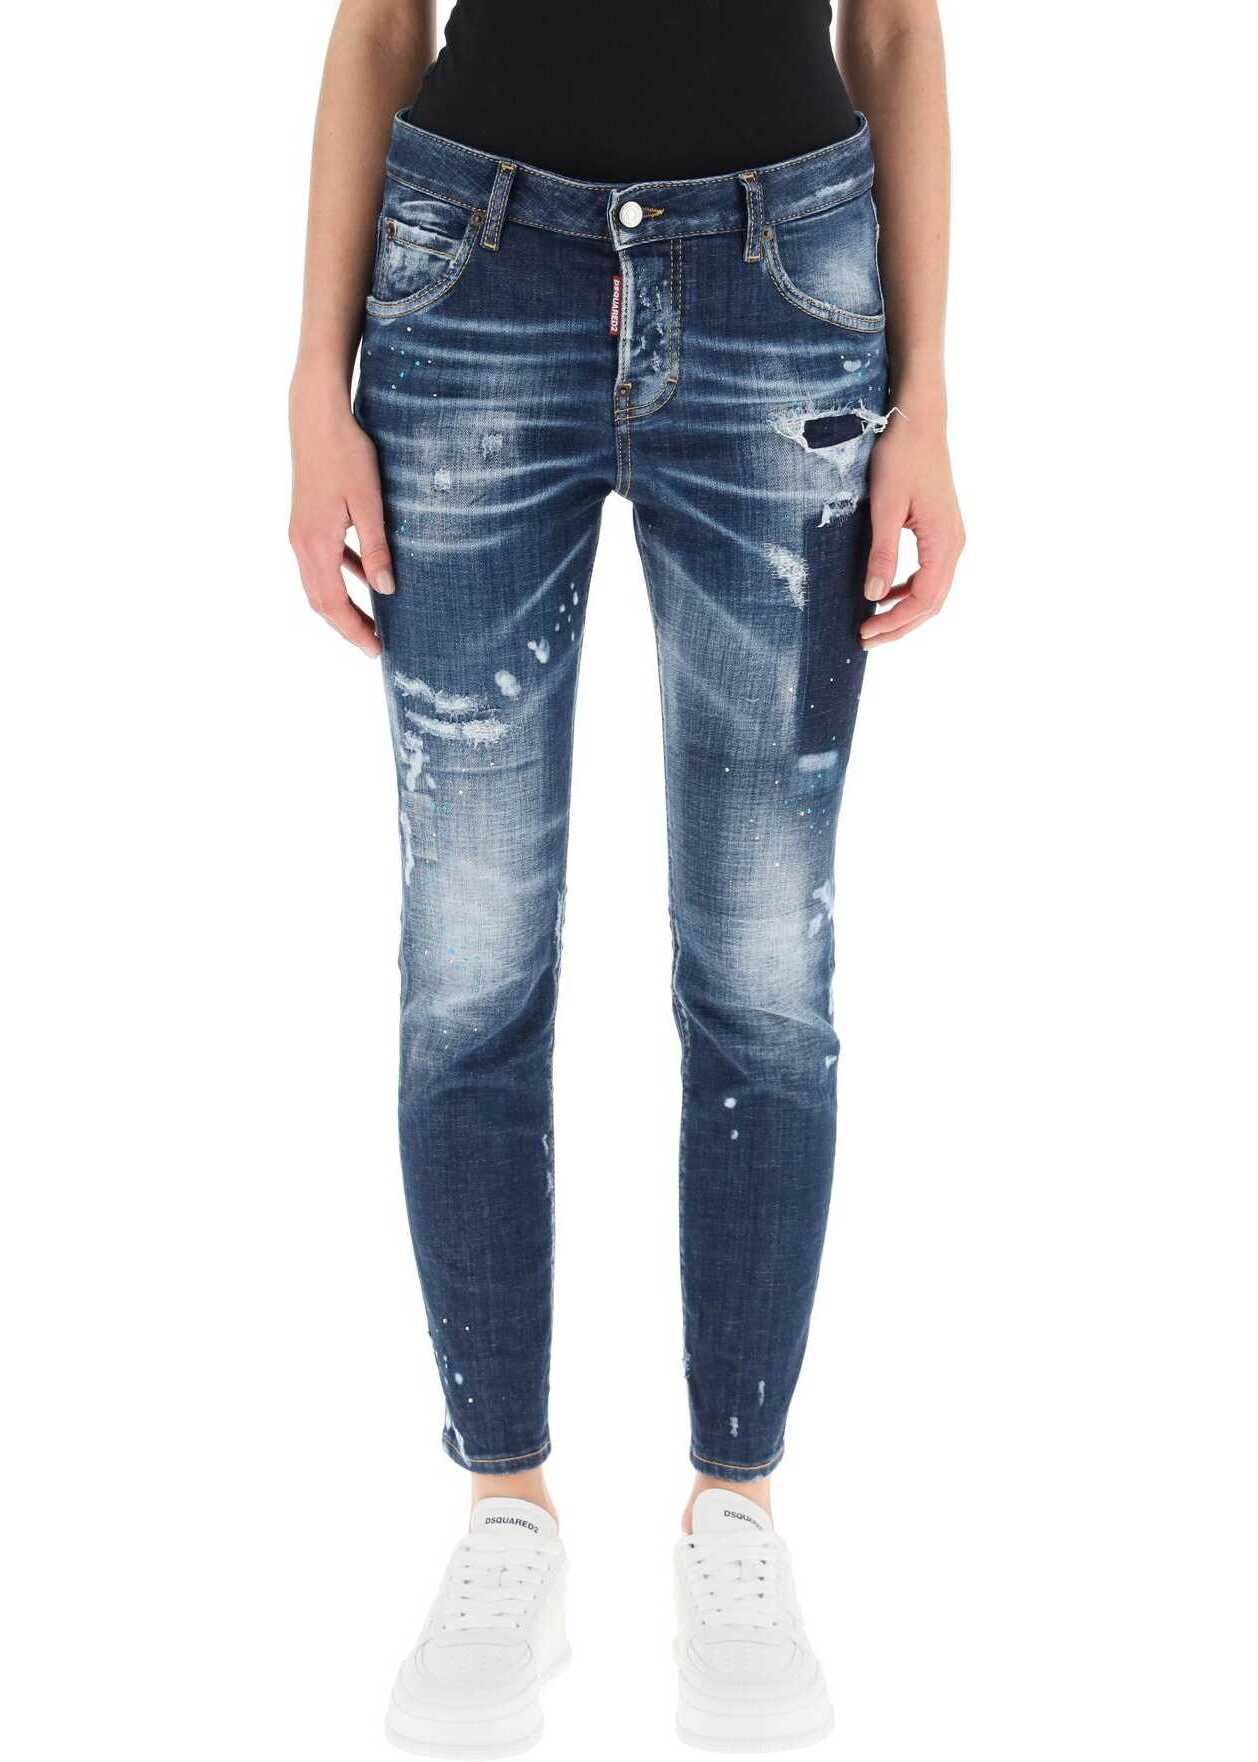 DSQUARED2 Cool Girl Cropped Jeans* NAVY BLUE